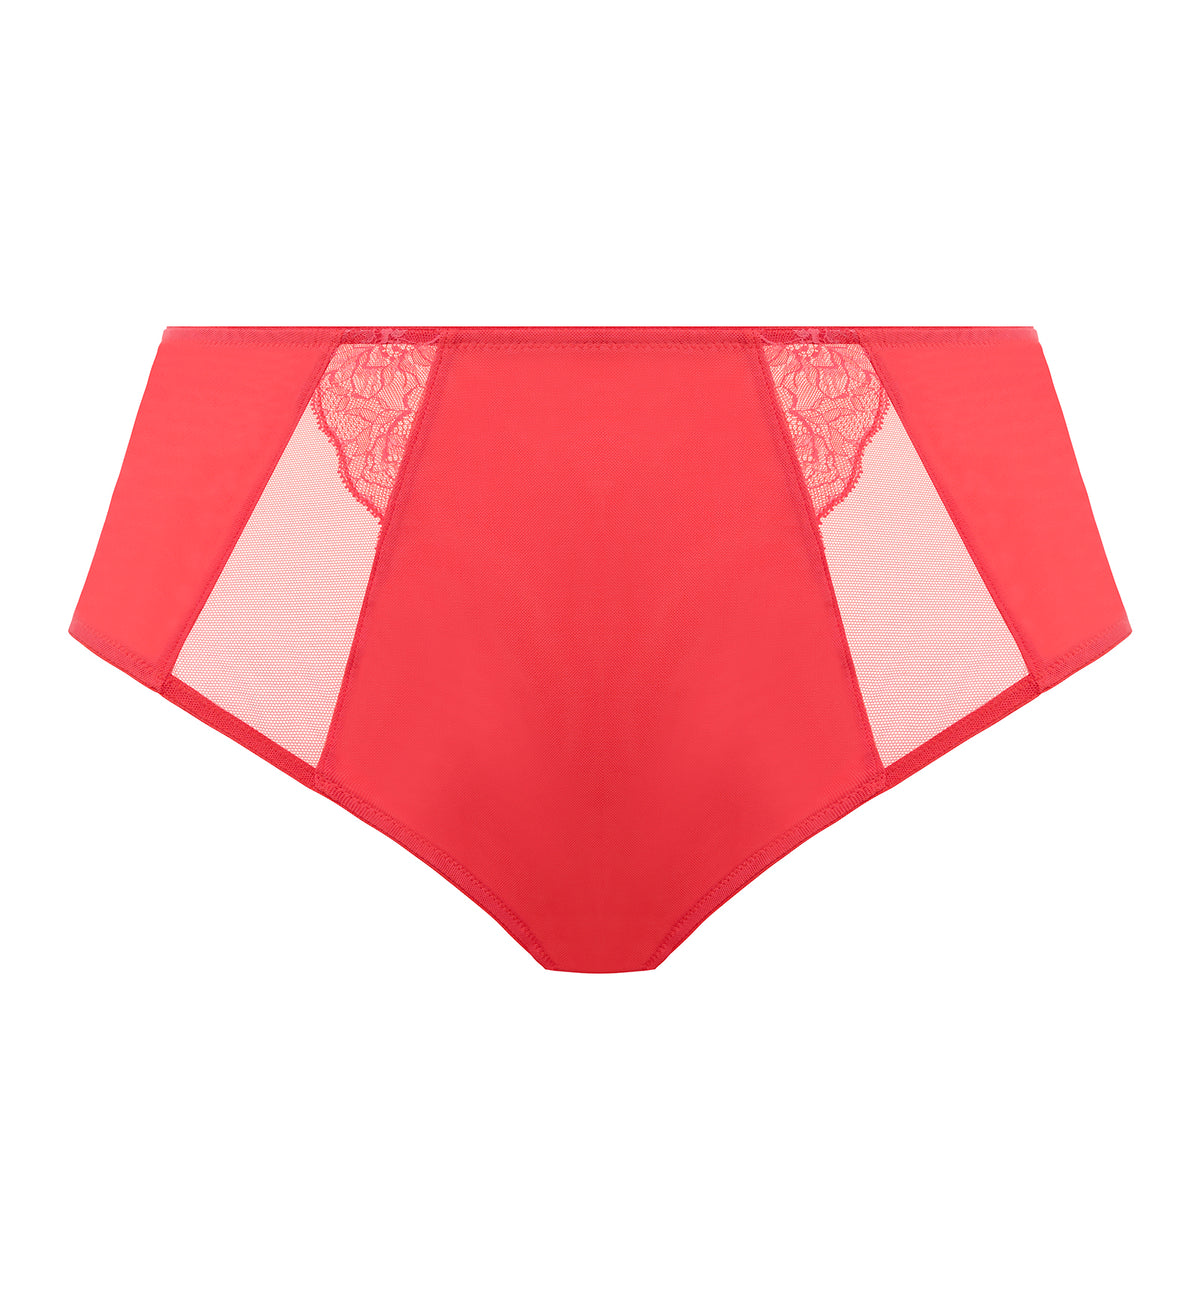 Elomi Brianna Full Panty Brief (8085),Large,Cayenne - Cayenne,Large